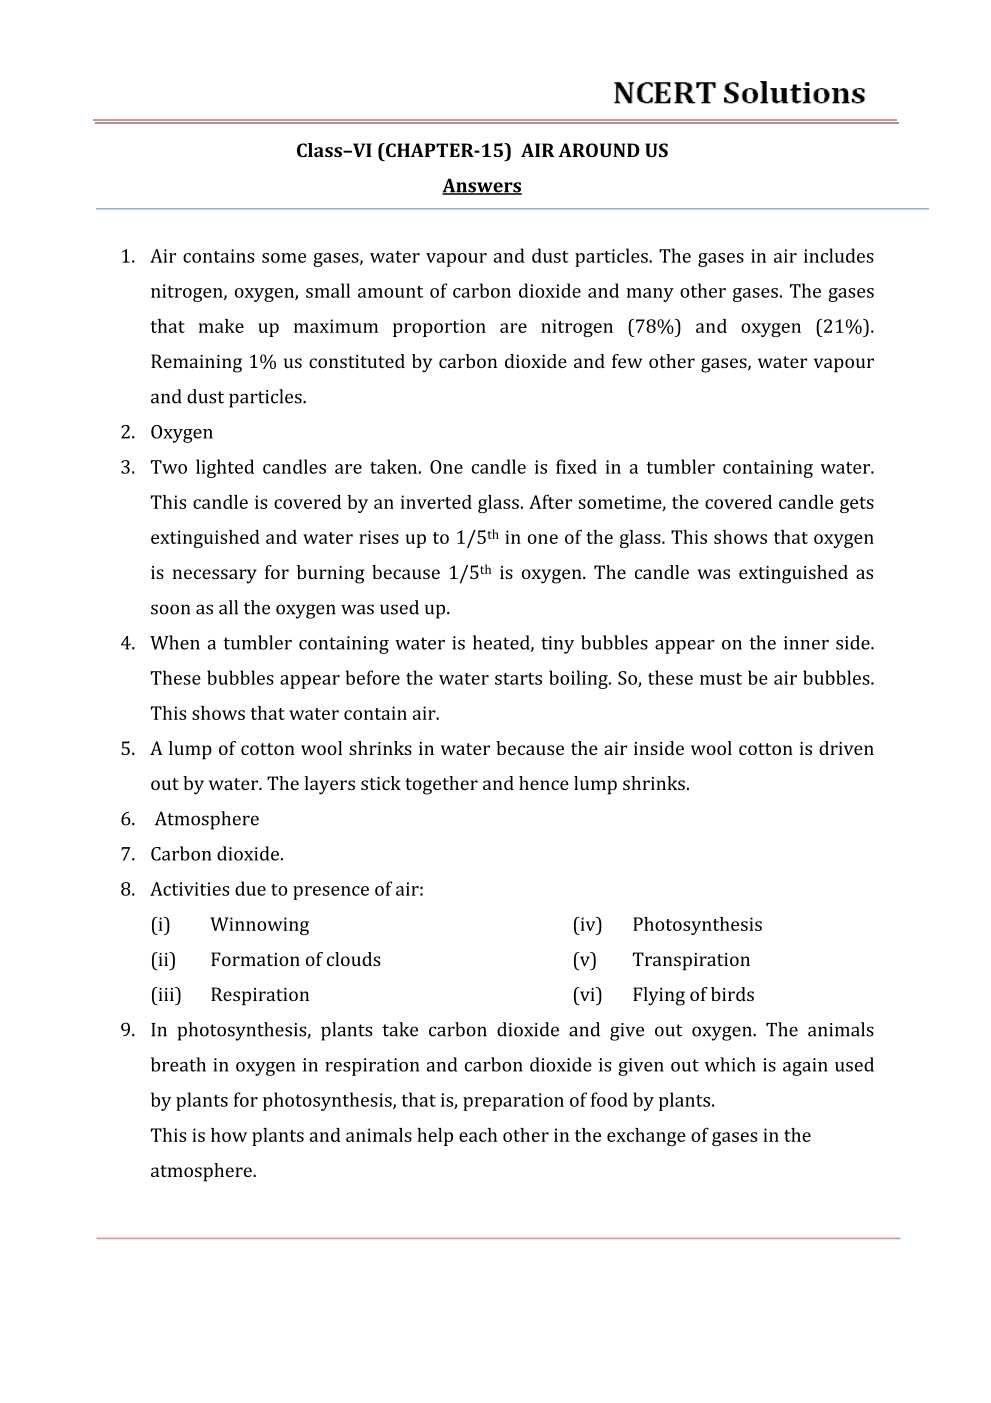 NCERT Solutions For Class 6 Science Chapter 15